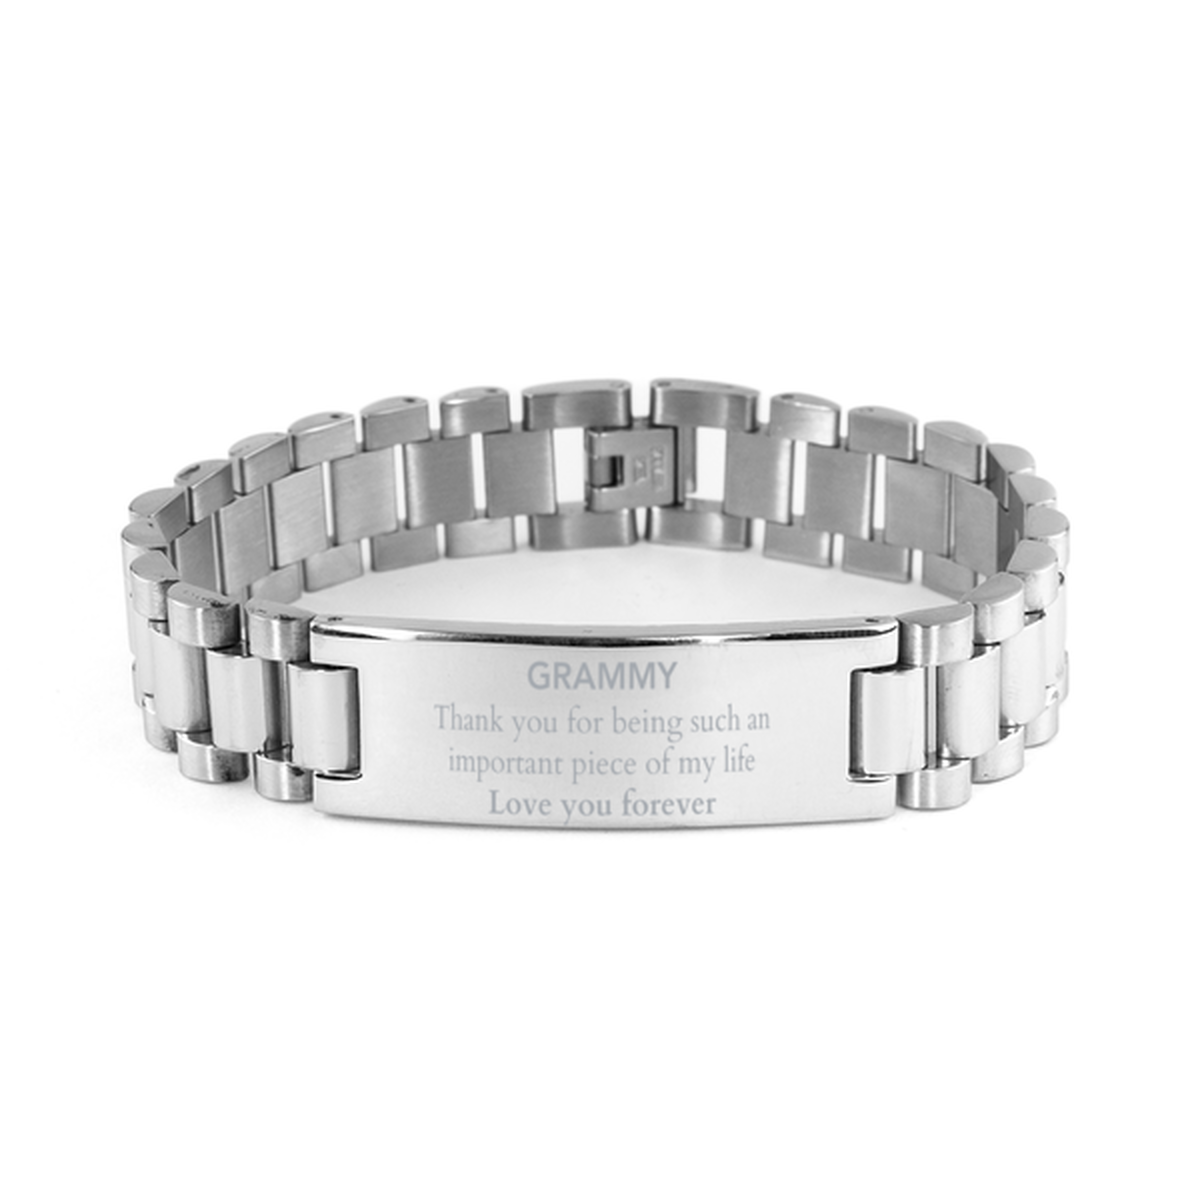 Appropriate Grammy Ladder Stainless Steel Bracelet Epic Birthday Gifts for Grammy Thank you for being such an important piece of my life Grammy Christmas Mothers Fathers Day